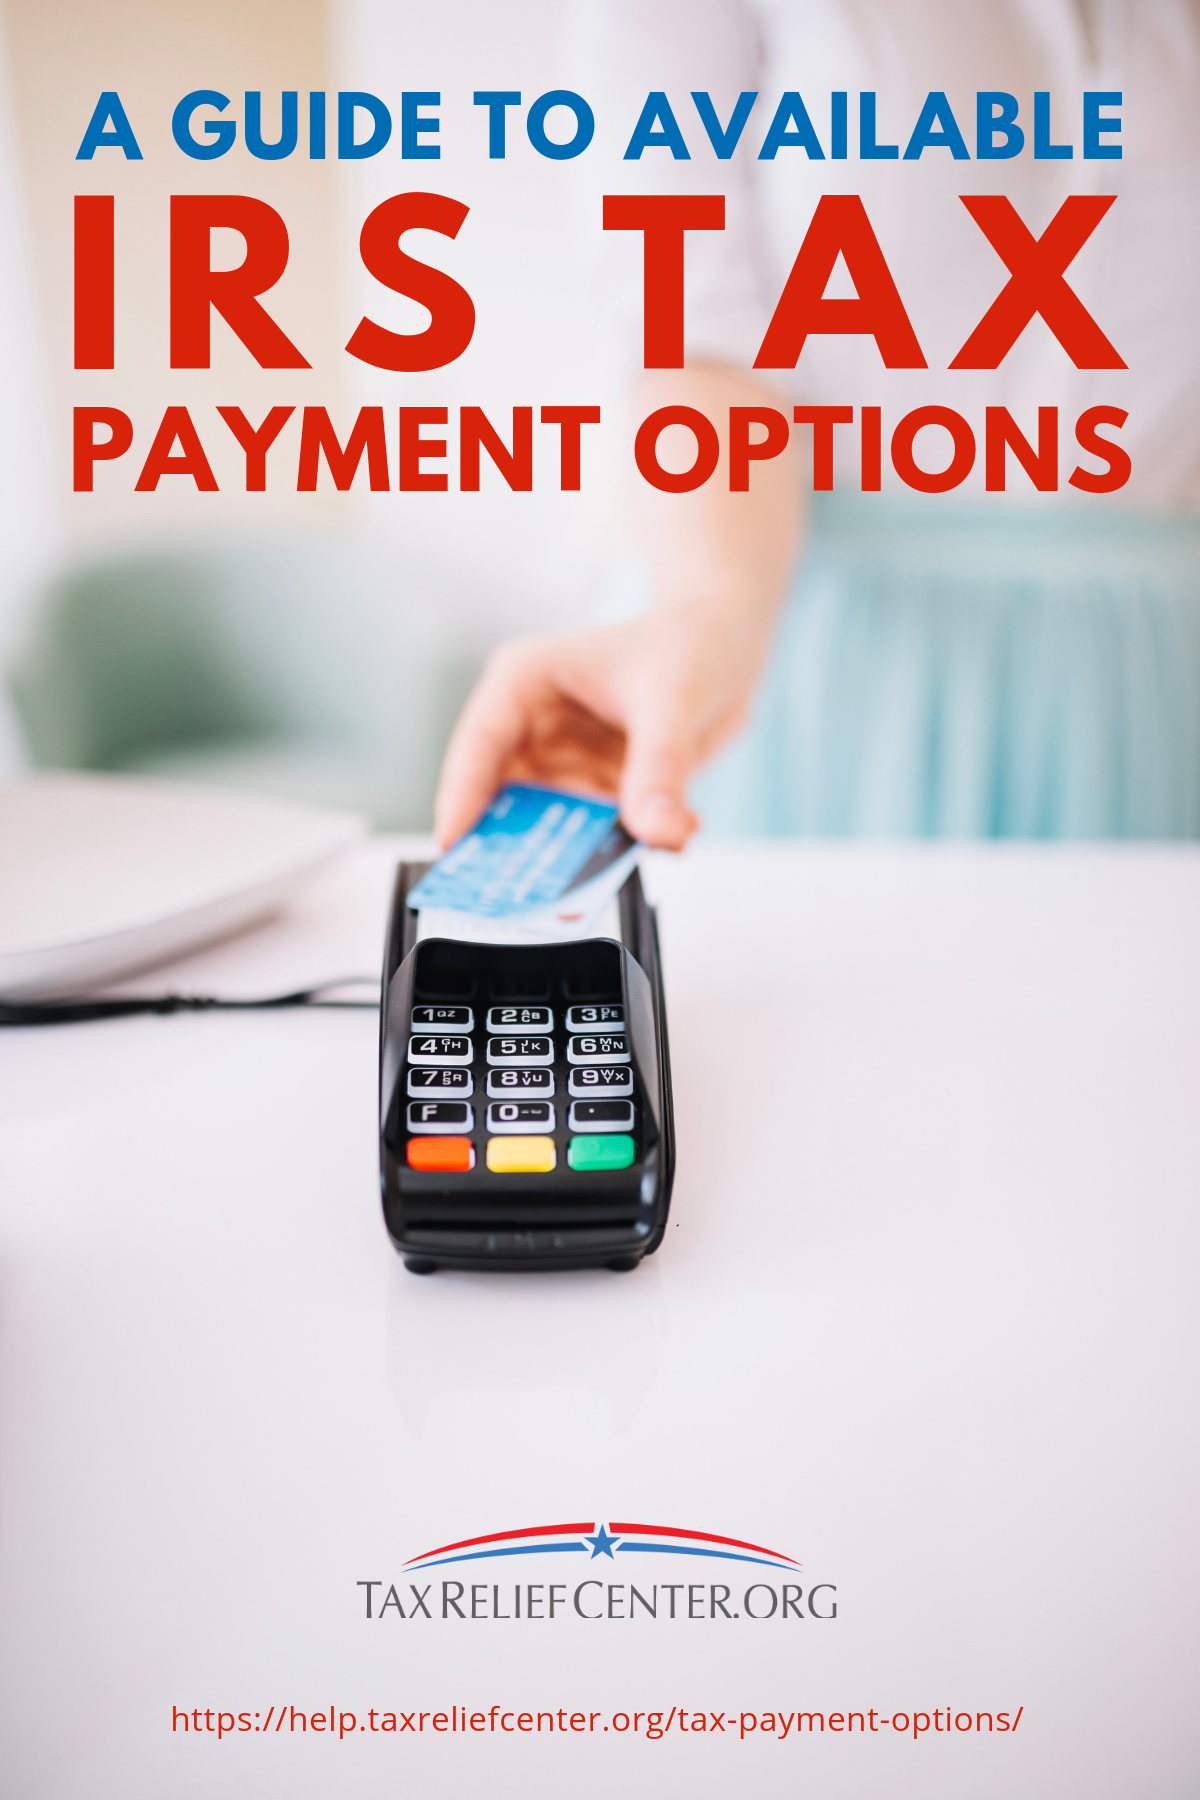 A Guide To Available IRS Tax Payment Options https://help.taxreliefcenter.org/tax-payment-options/